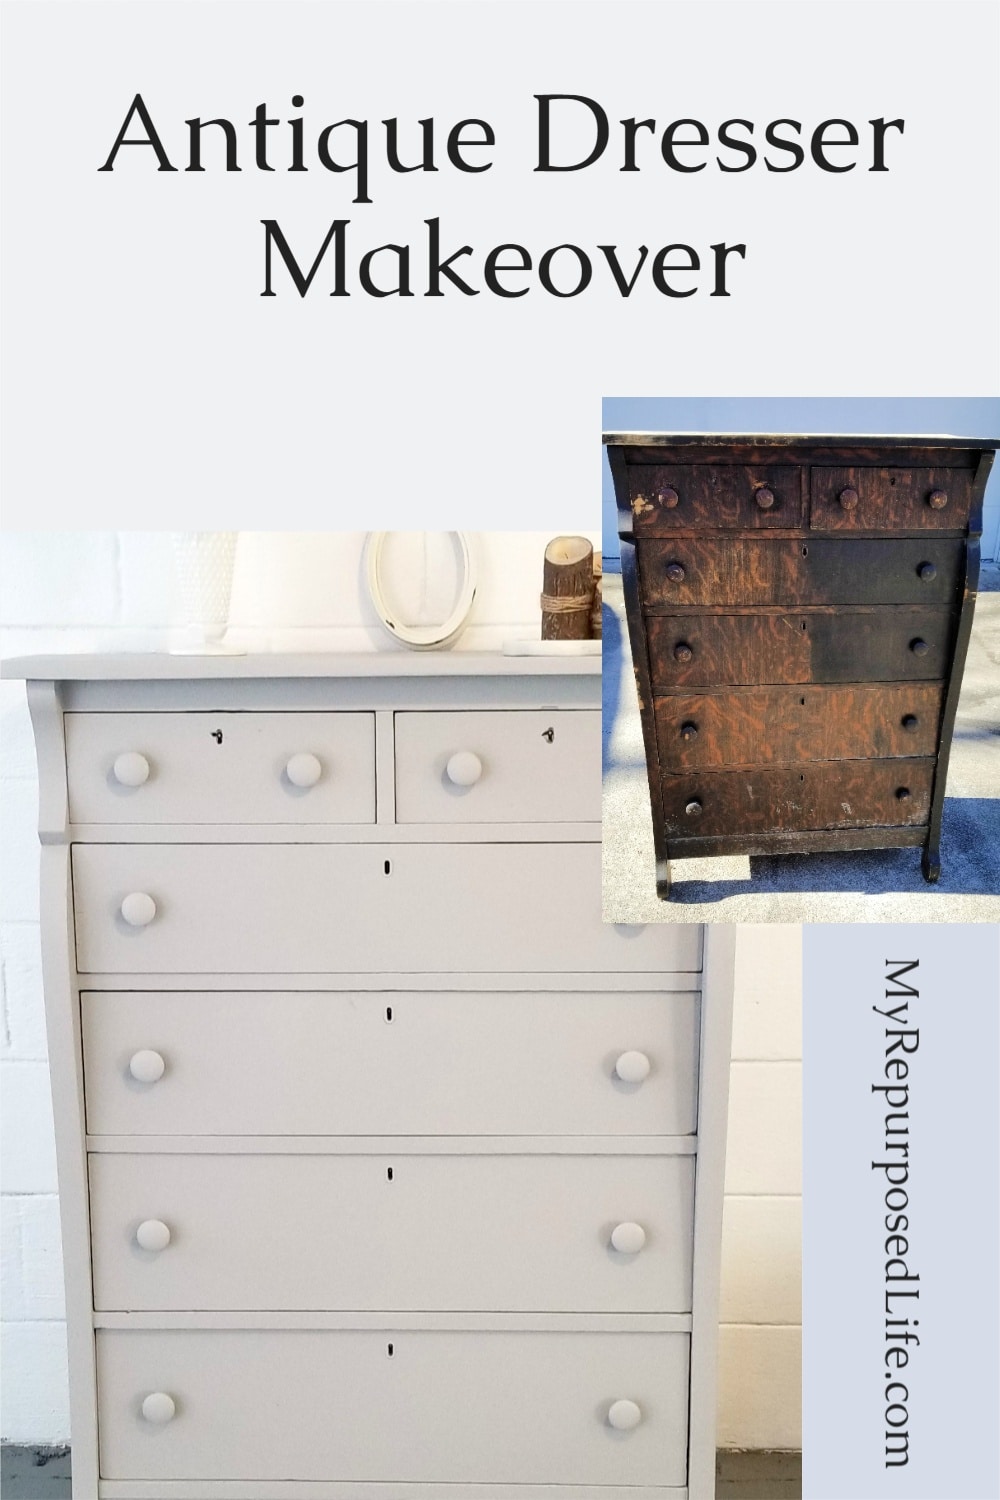 This free chest of drawers gets a new lease on life with a few repairs and some paint. Using a paint sprayer makes this a quick and easy furniture flip! #MyRepurposedLife #furniture #makeover #dresser #diy #paintsprayer #easy #project #furnitureflip via @repurposedlife